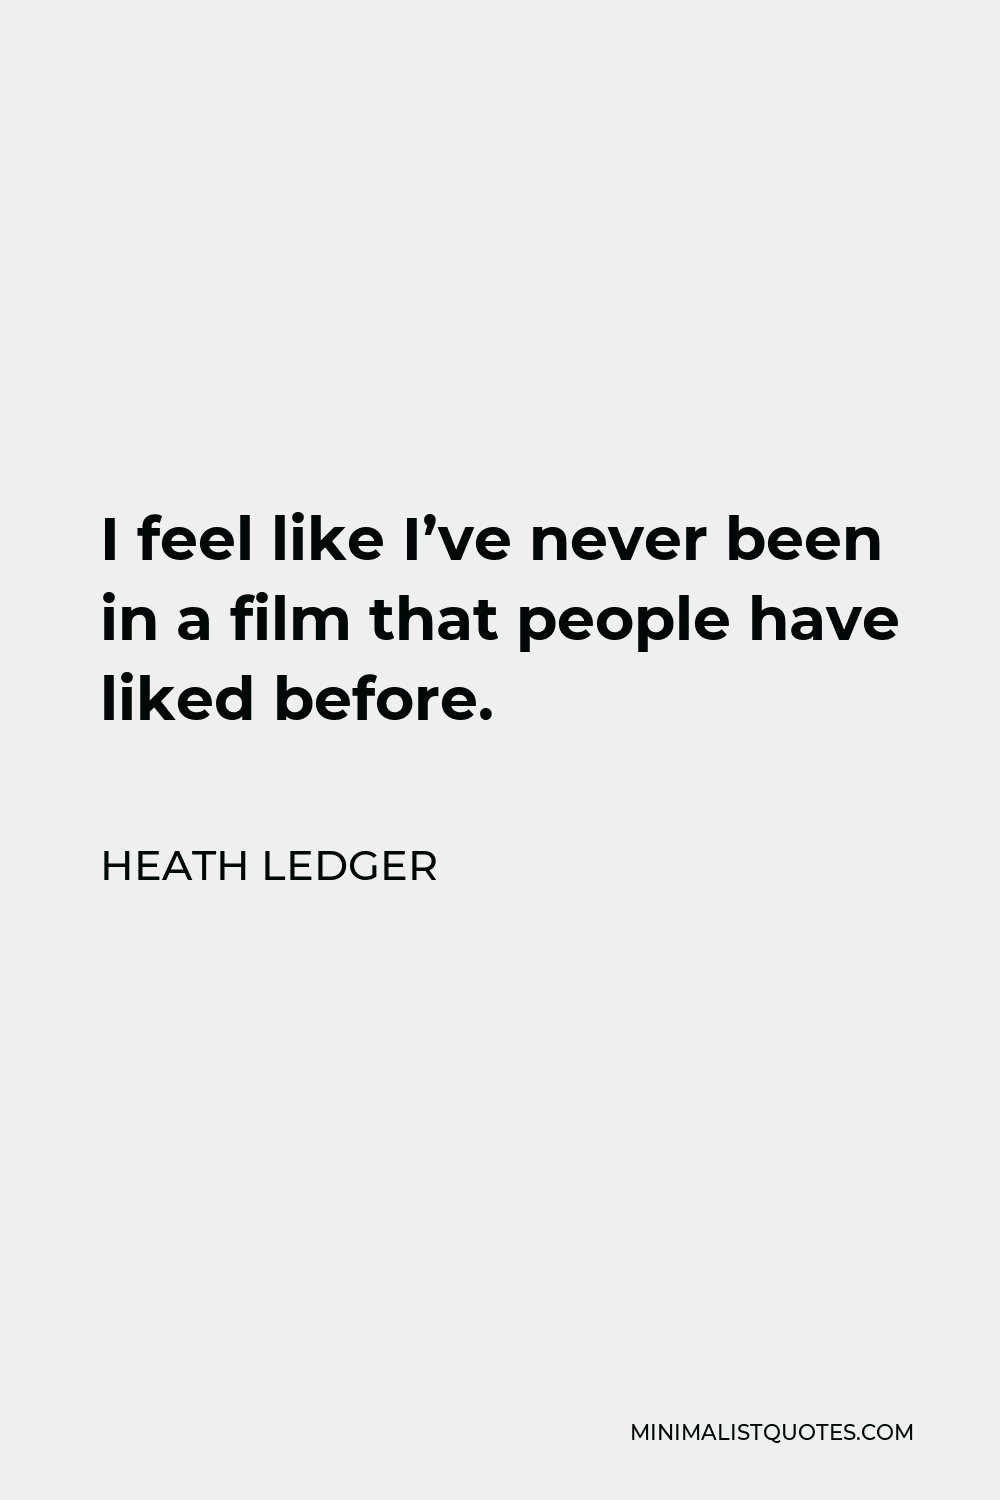 Heath Ledger Quote - I feel like I’ve never been in a film that people have liked before.